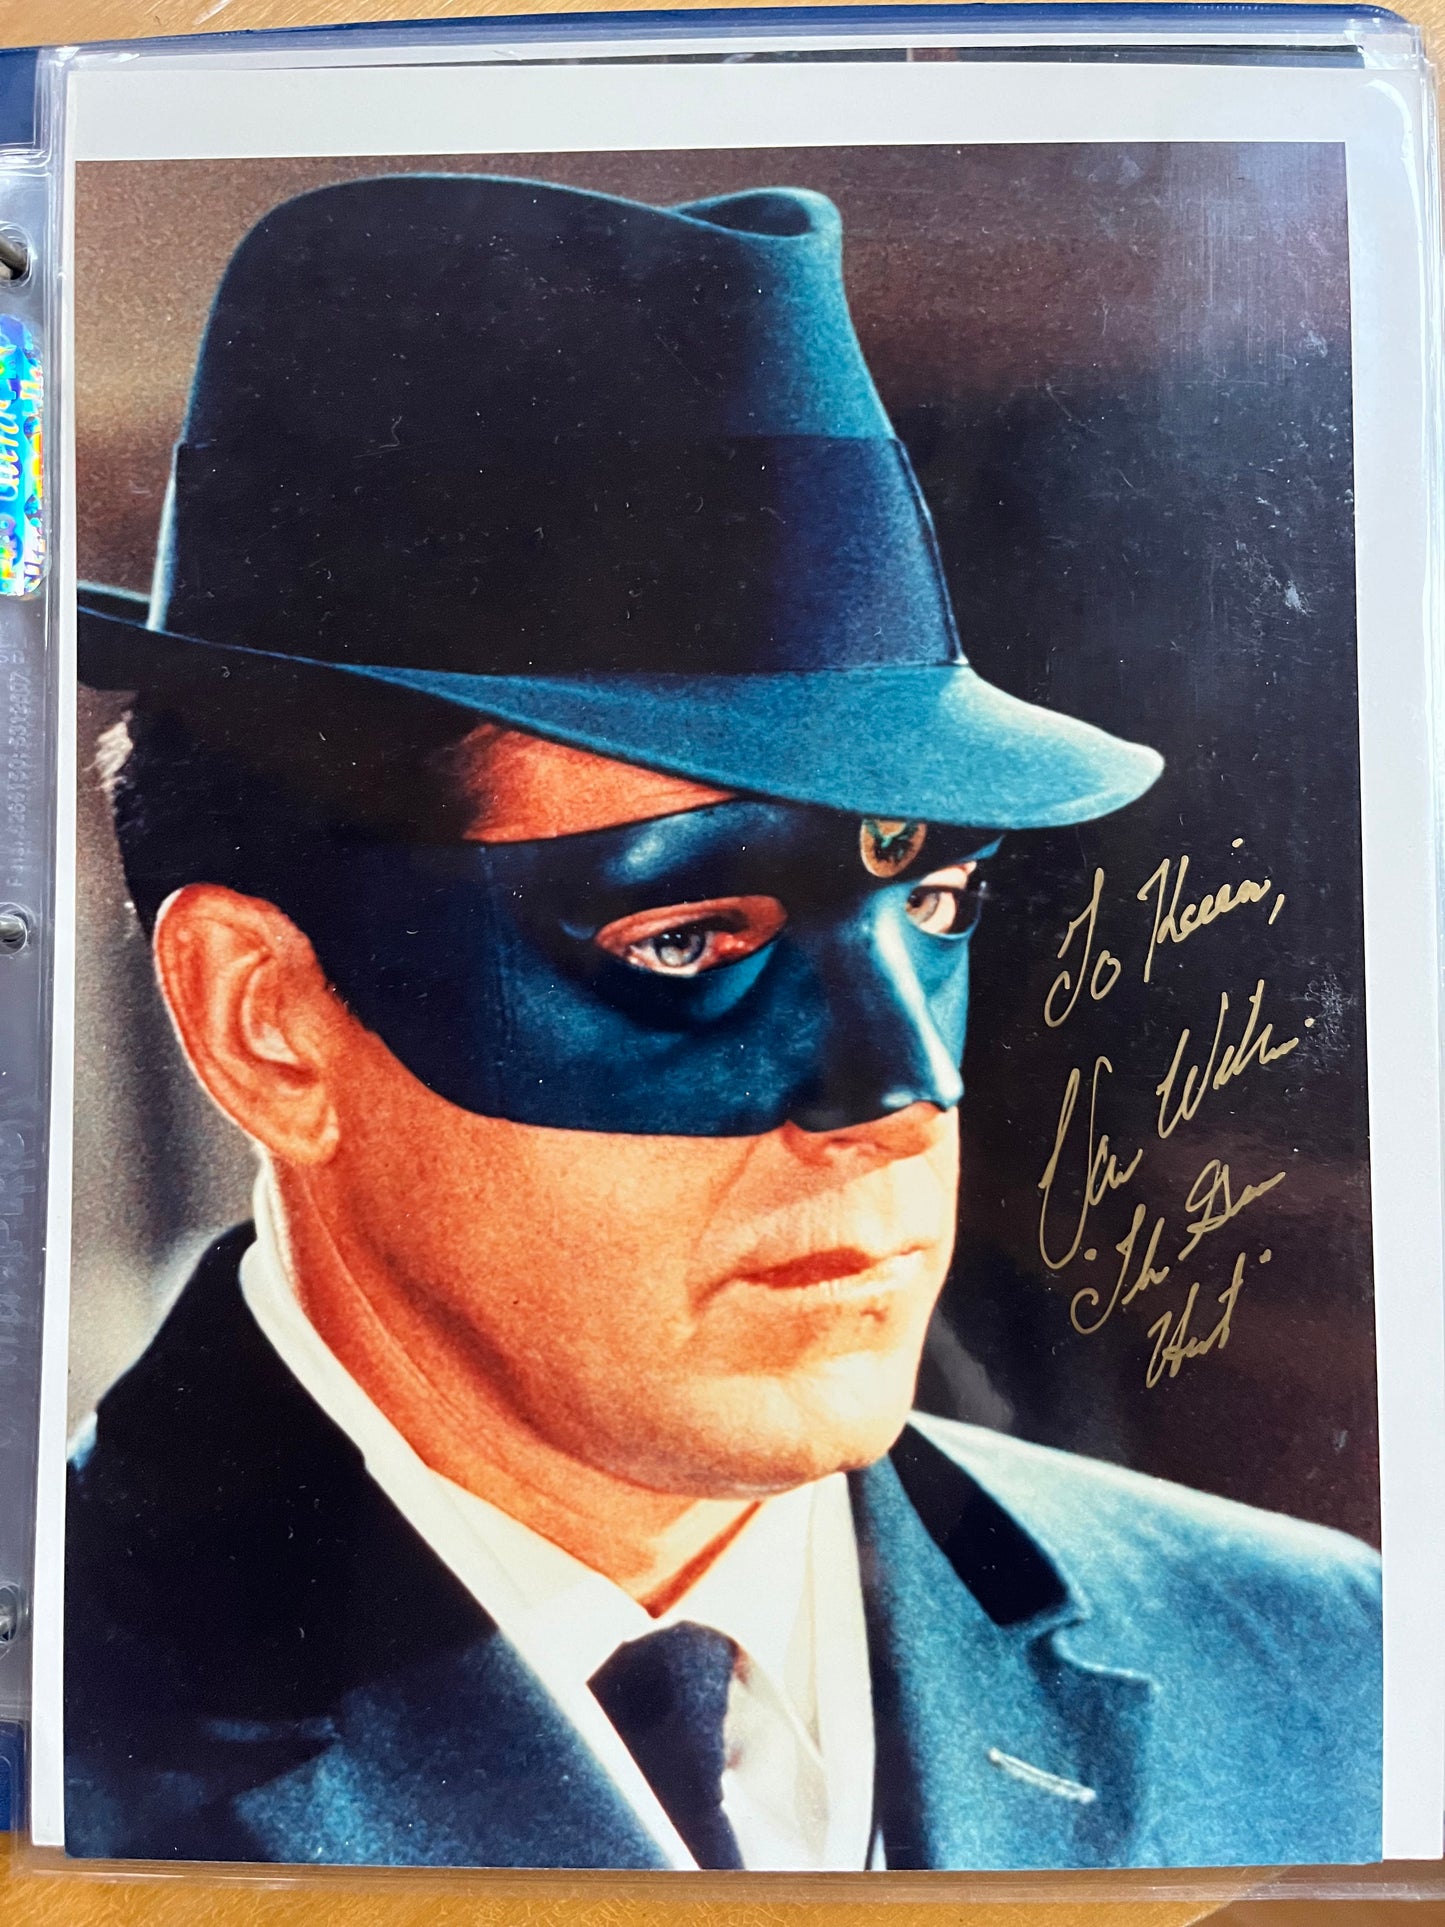 Van Williams from TV's THE GREEN HORNET, autograph